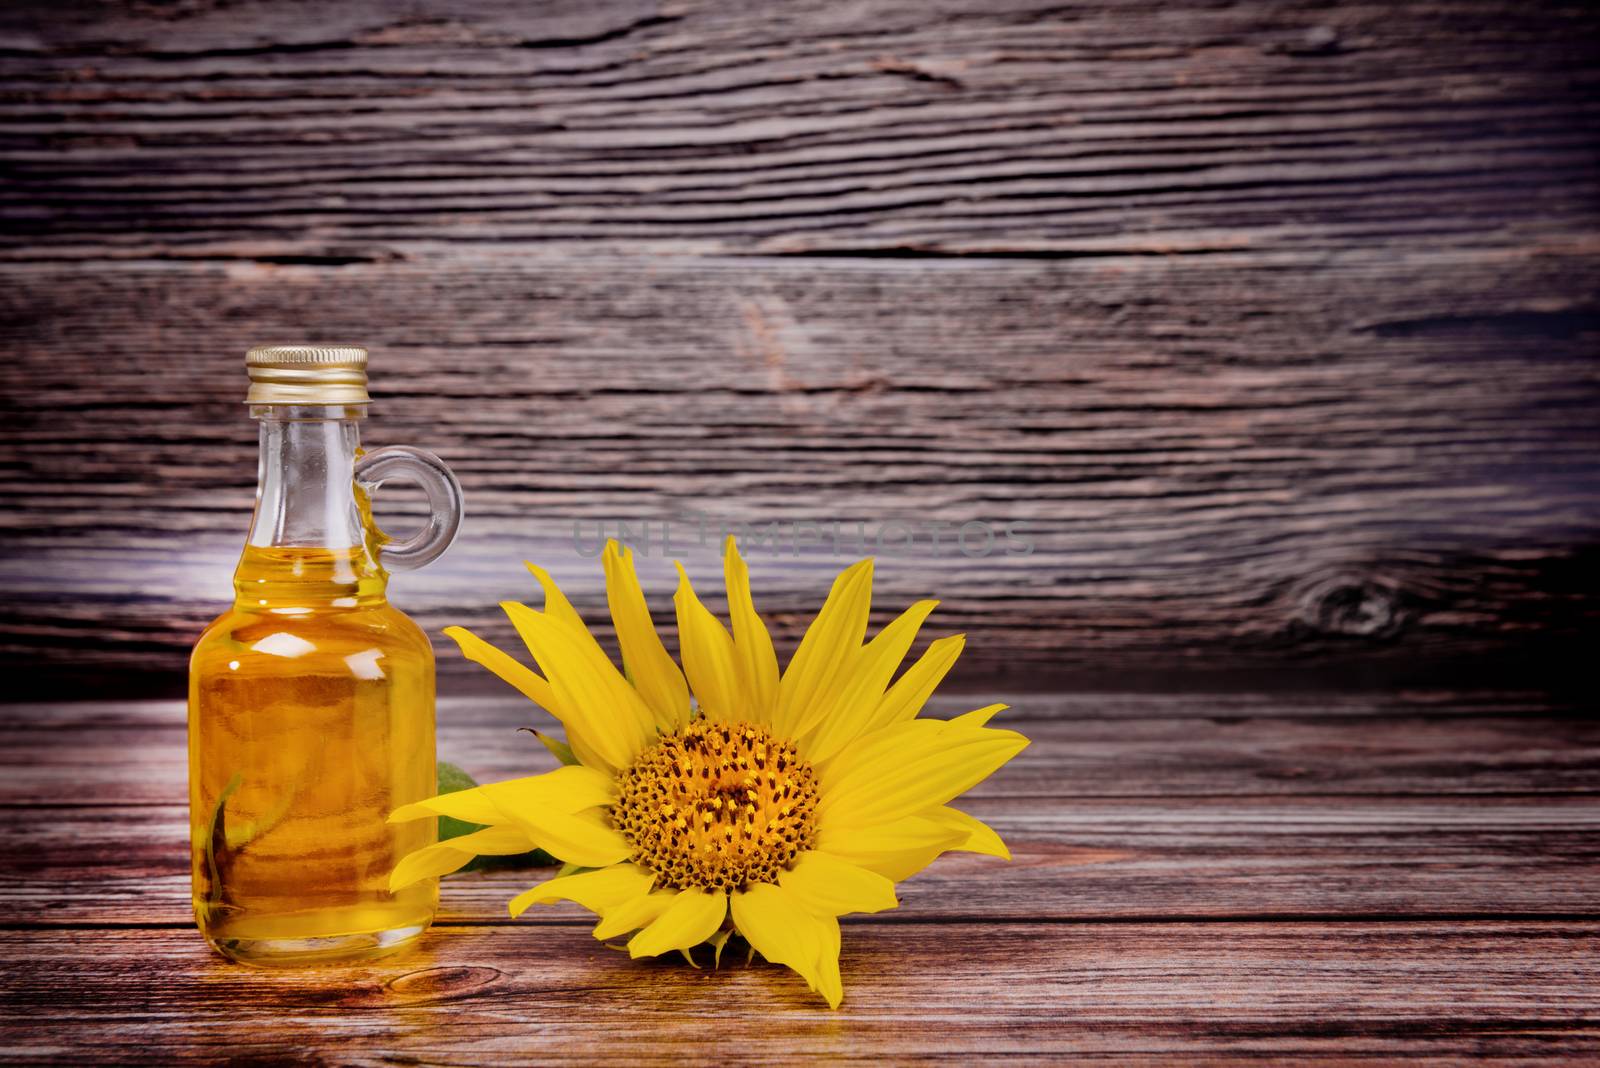 Glass bottle with sunflower oil and flowers on wooden background. Studio shot. by leonik